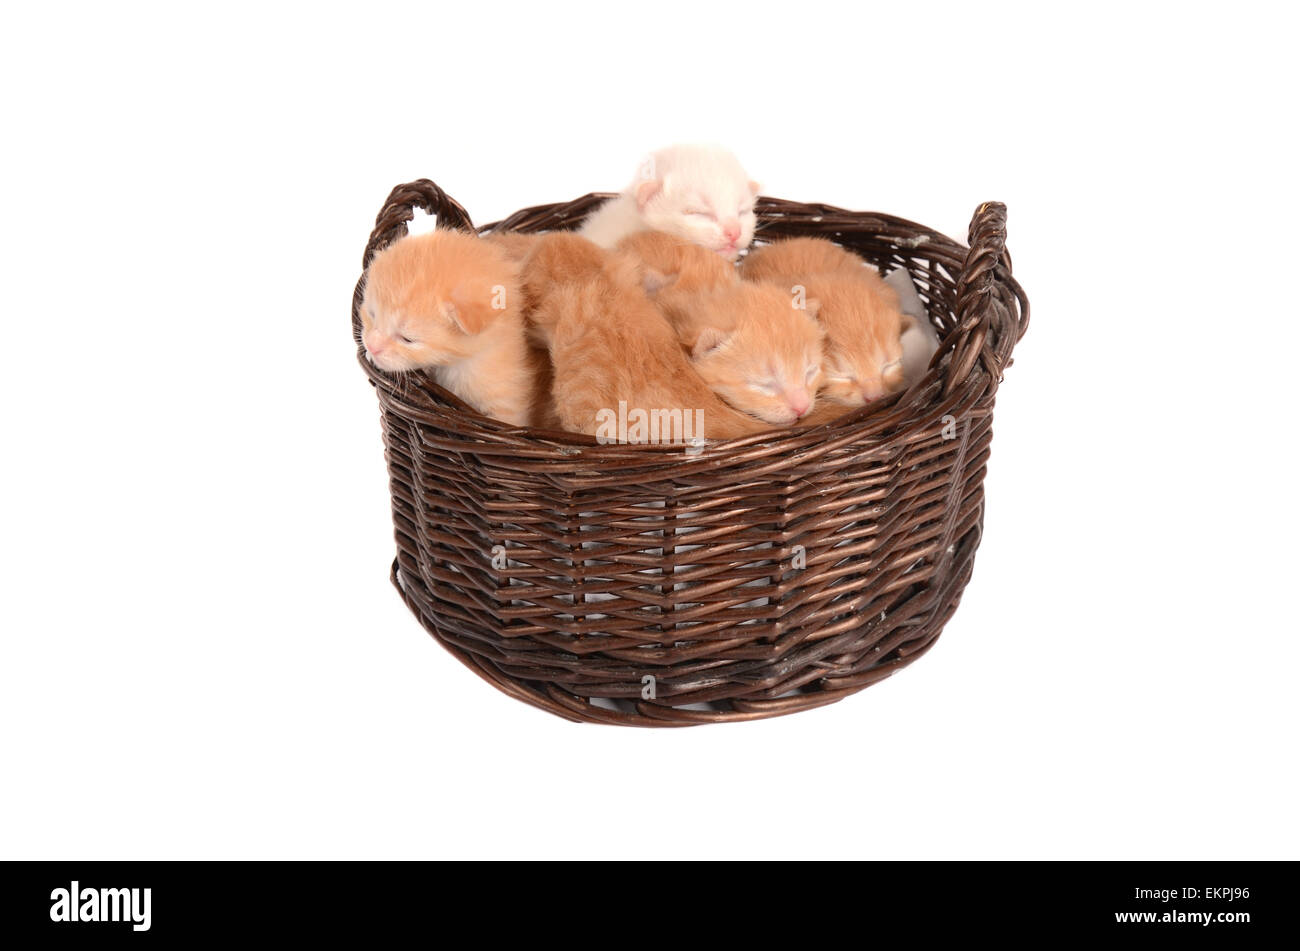 Ginger Kittens in a Basket Stock Photo